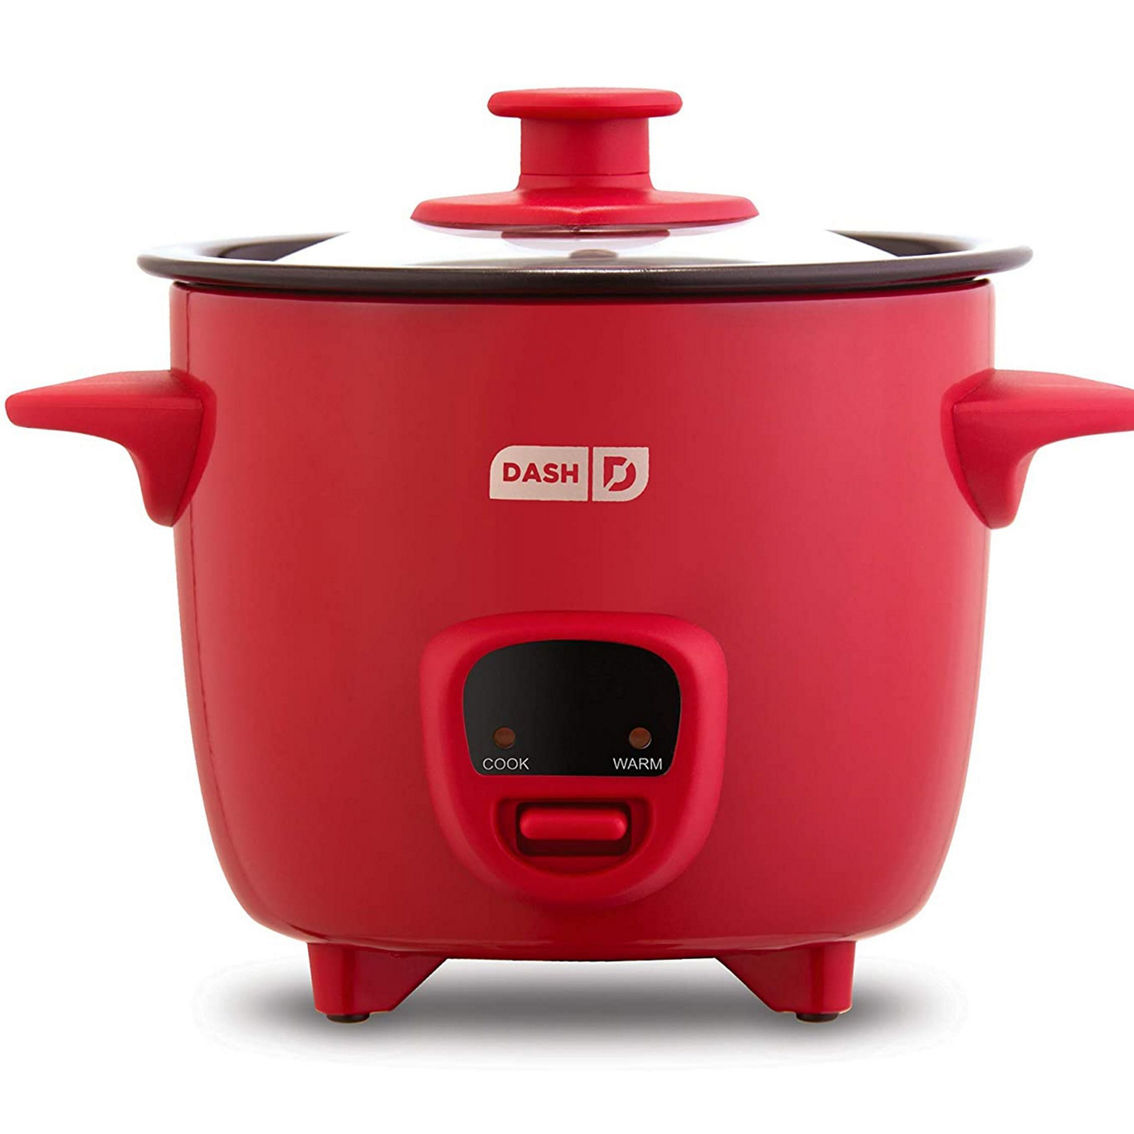 Dash Mini 16 Ounce Rice Cooker in Red with Keep Warm Setting - Image 2 of 4